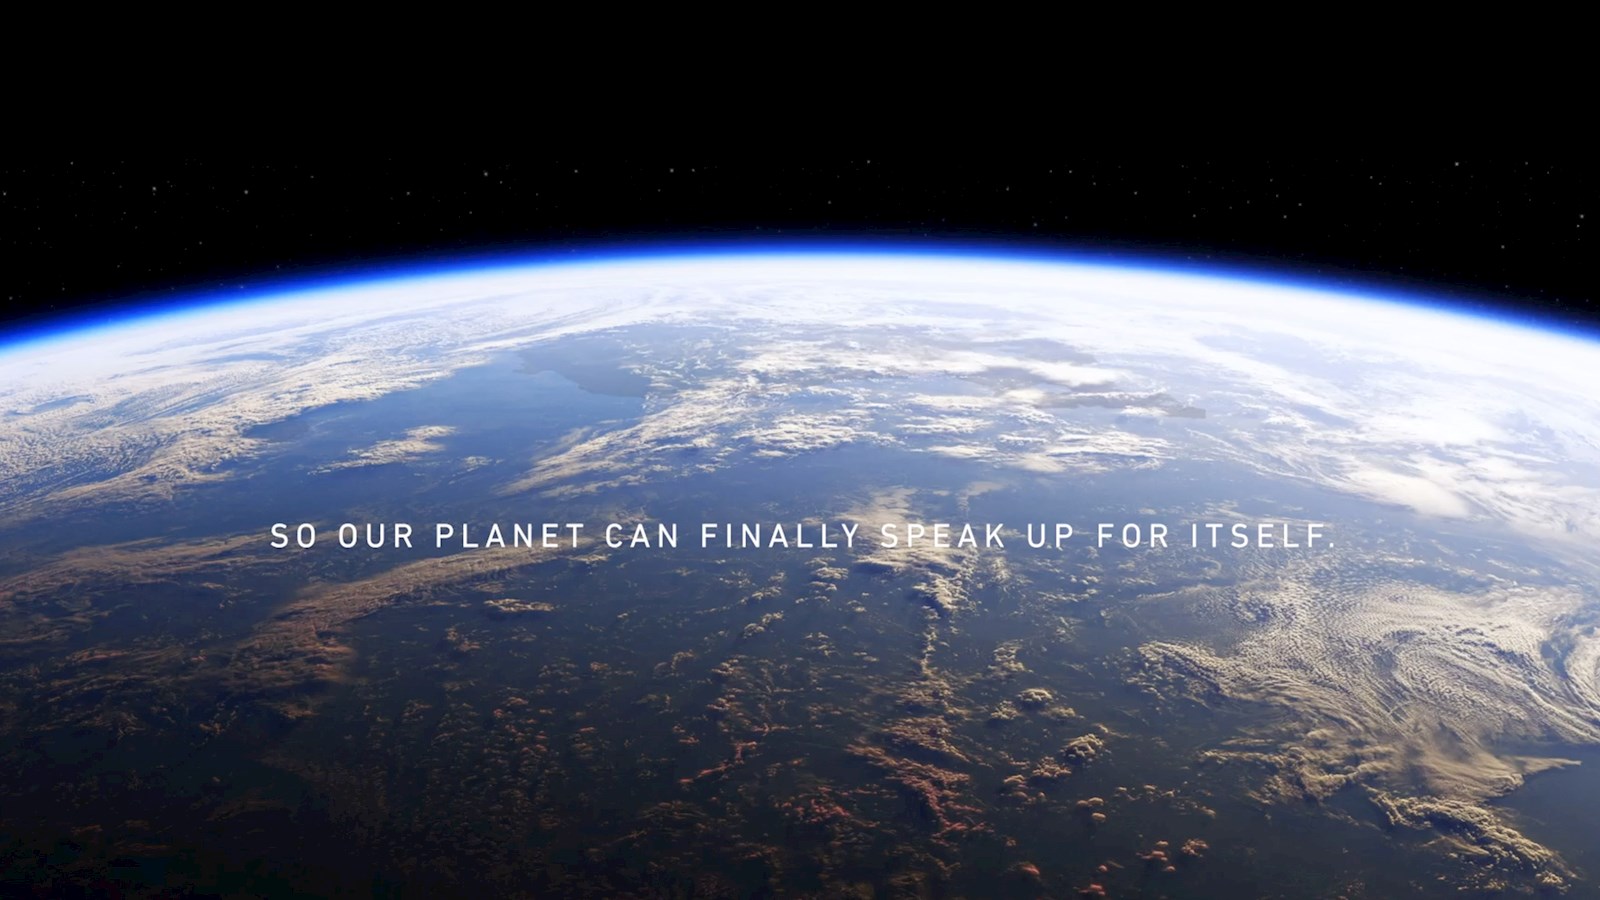 Image of the edge of the Earth with text overlaid "So our plant can finally speak up for itself"